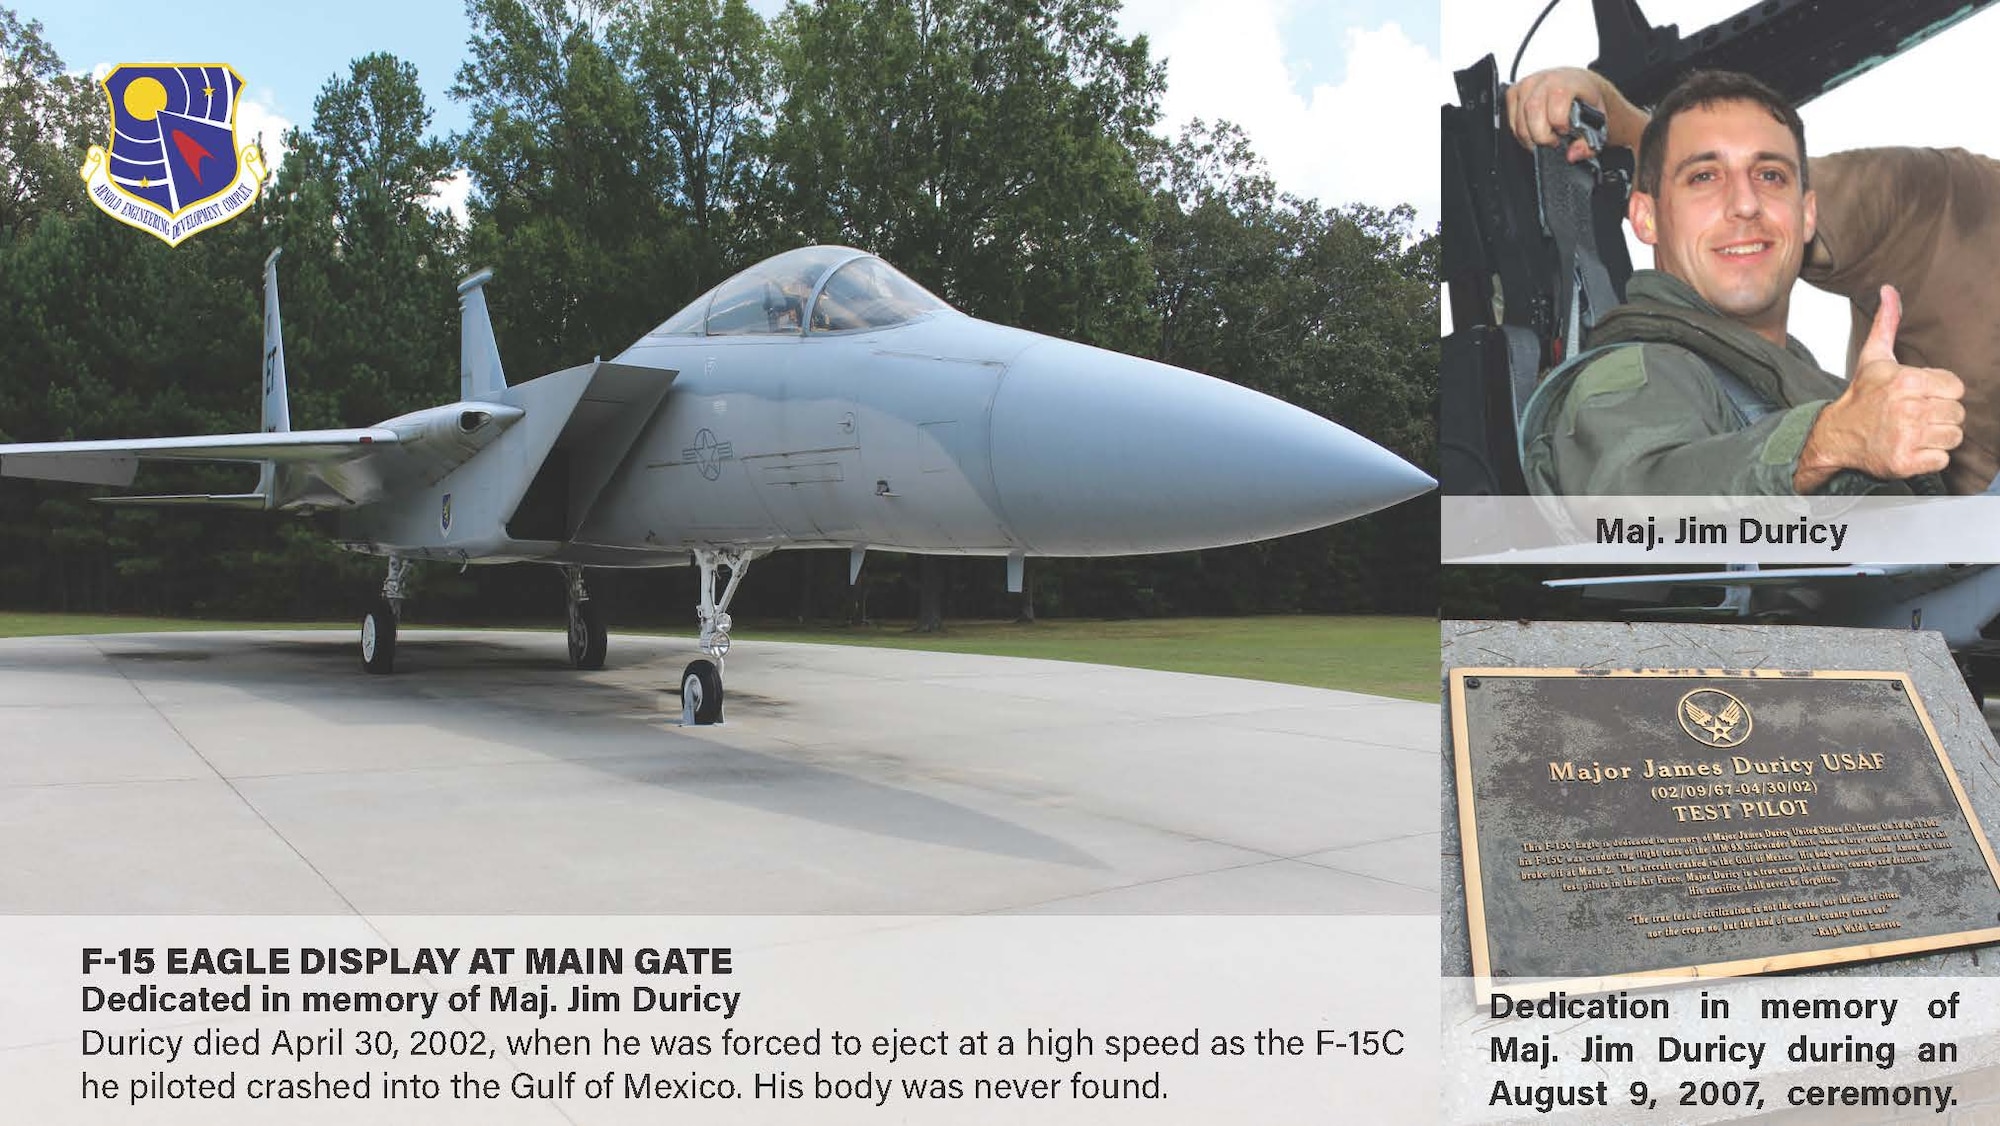 The static F-15 Eagle on display outside the Main Gate and Arnold Air Force Base, Tenn., is dedicated to Maj. Jim Duricy. He died April 30, 2002, when he was forced to eject at a high speed as the F-15C he piloted crashed into the Gulf of Mexico. His body was never found. A 12-year test pilot, Duricy was assigned to the 40th Flight Test Squadron based at Eglin Air Force Base, Fla., at the time of his death. He was on a captive flight development test of a new missile when the aircraft crashed. (U.S. Air Force graphic by Brooke Brumley)